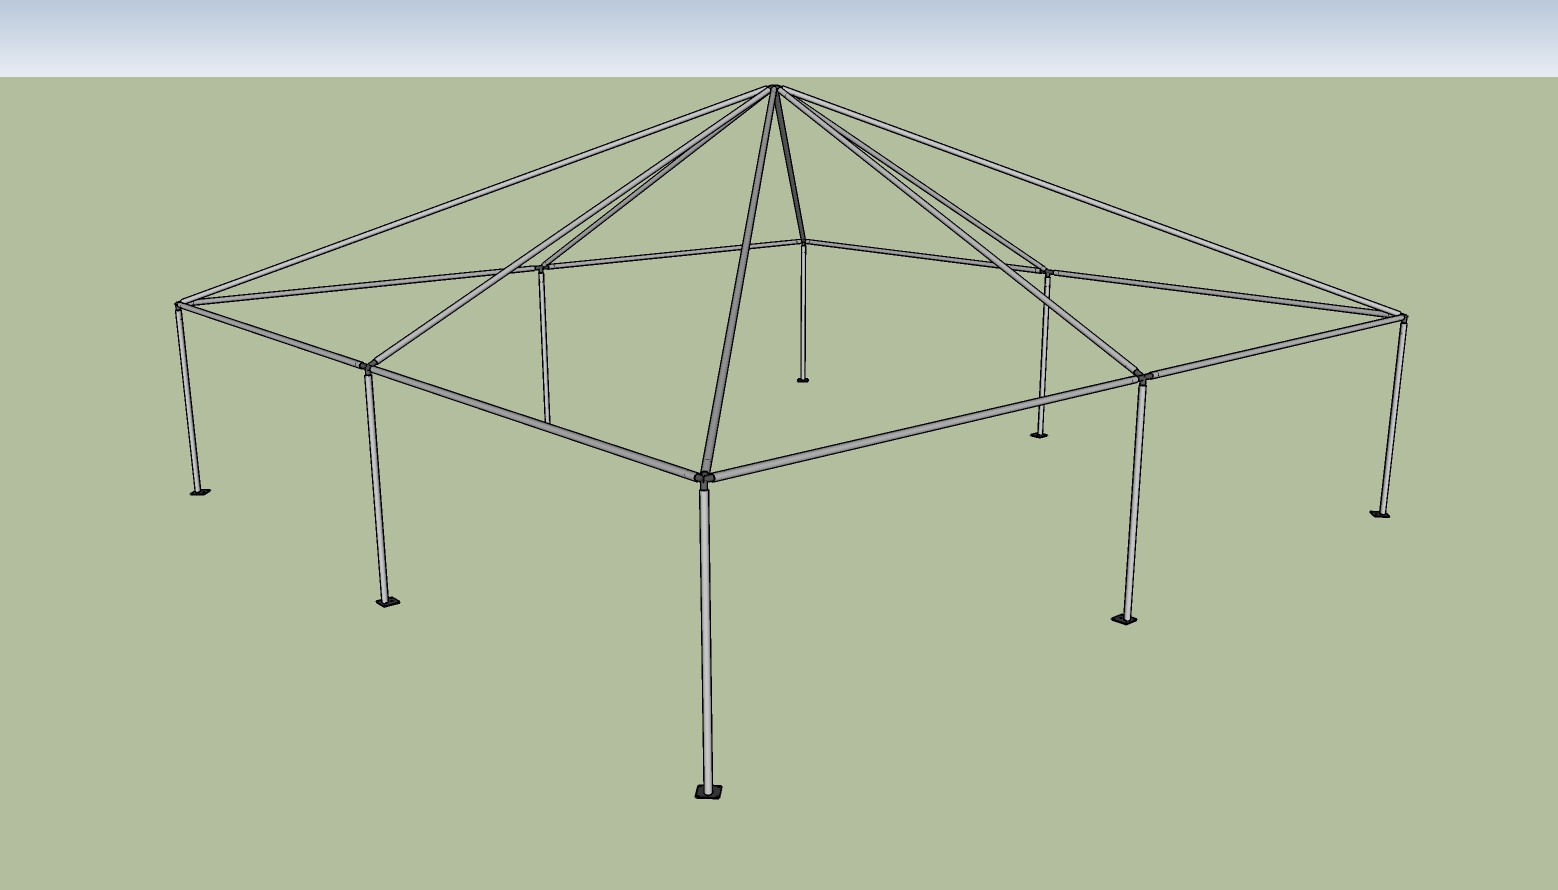 30x30 frame tent End View